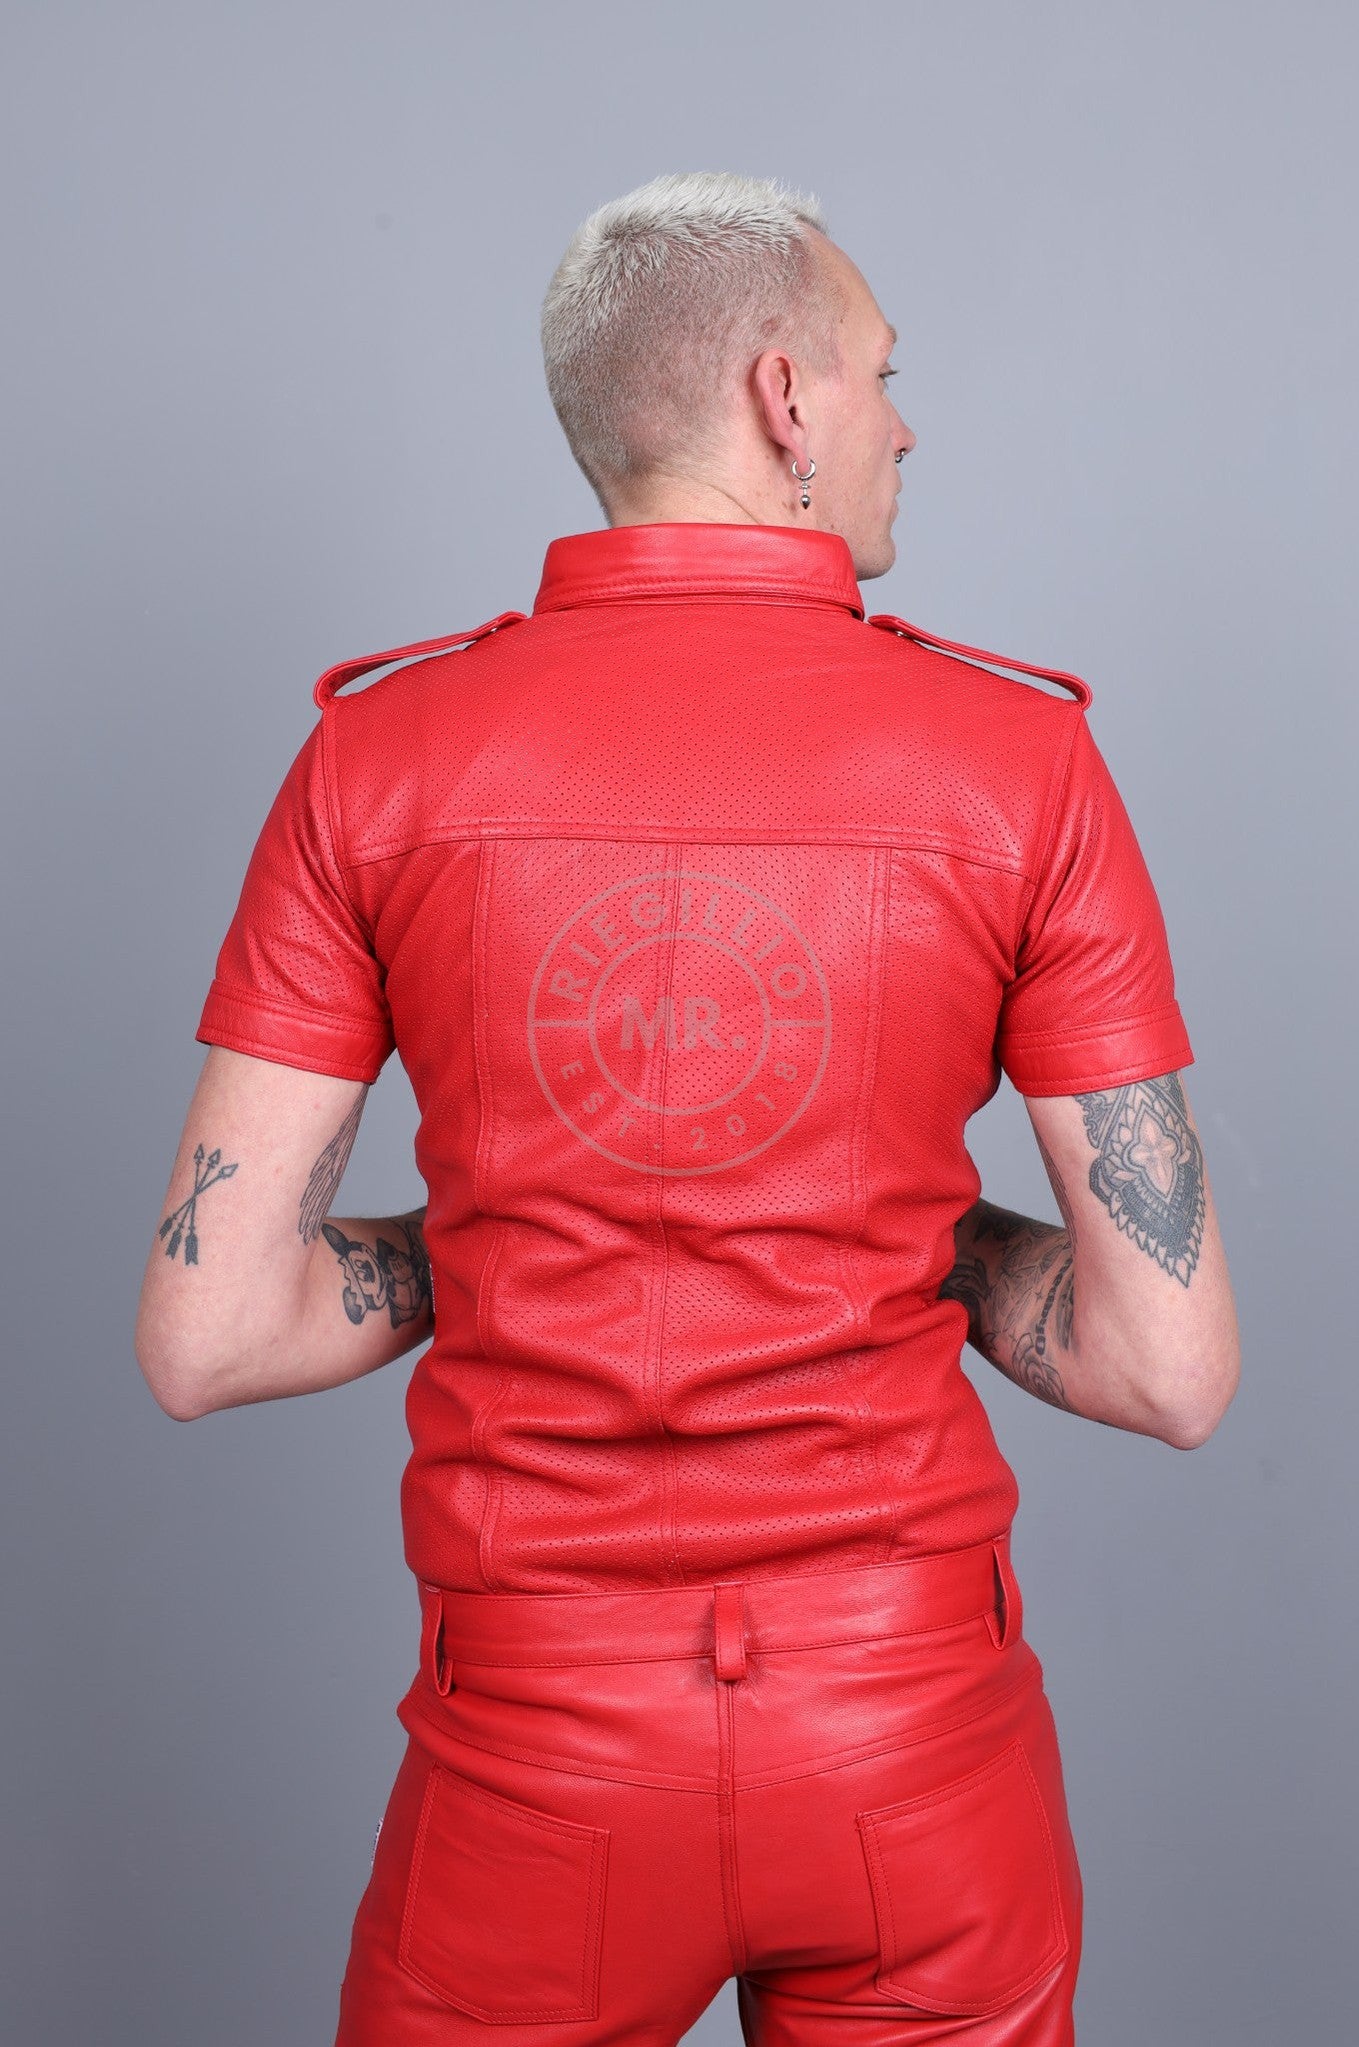 Red Leather Perforated Shirt at MR. Riegillio